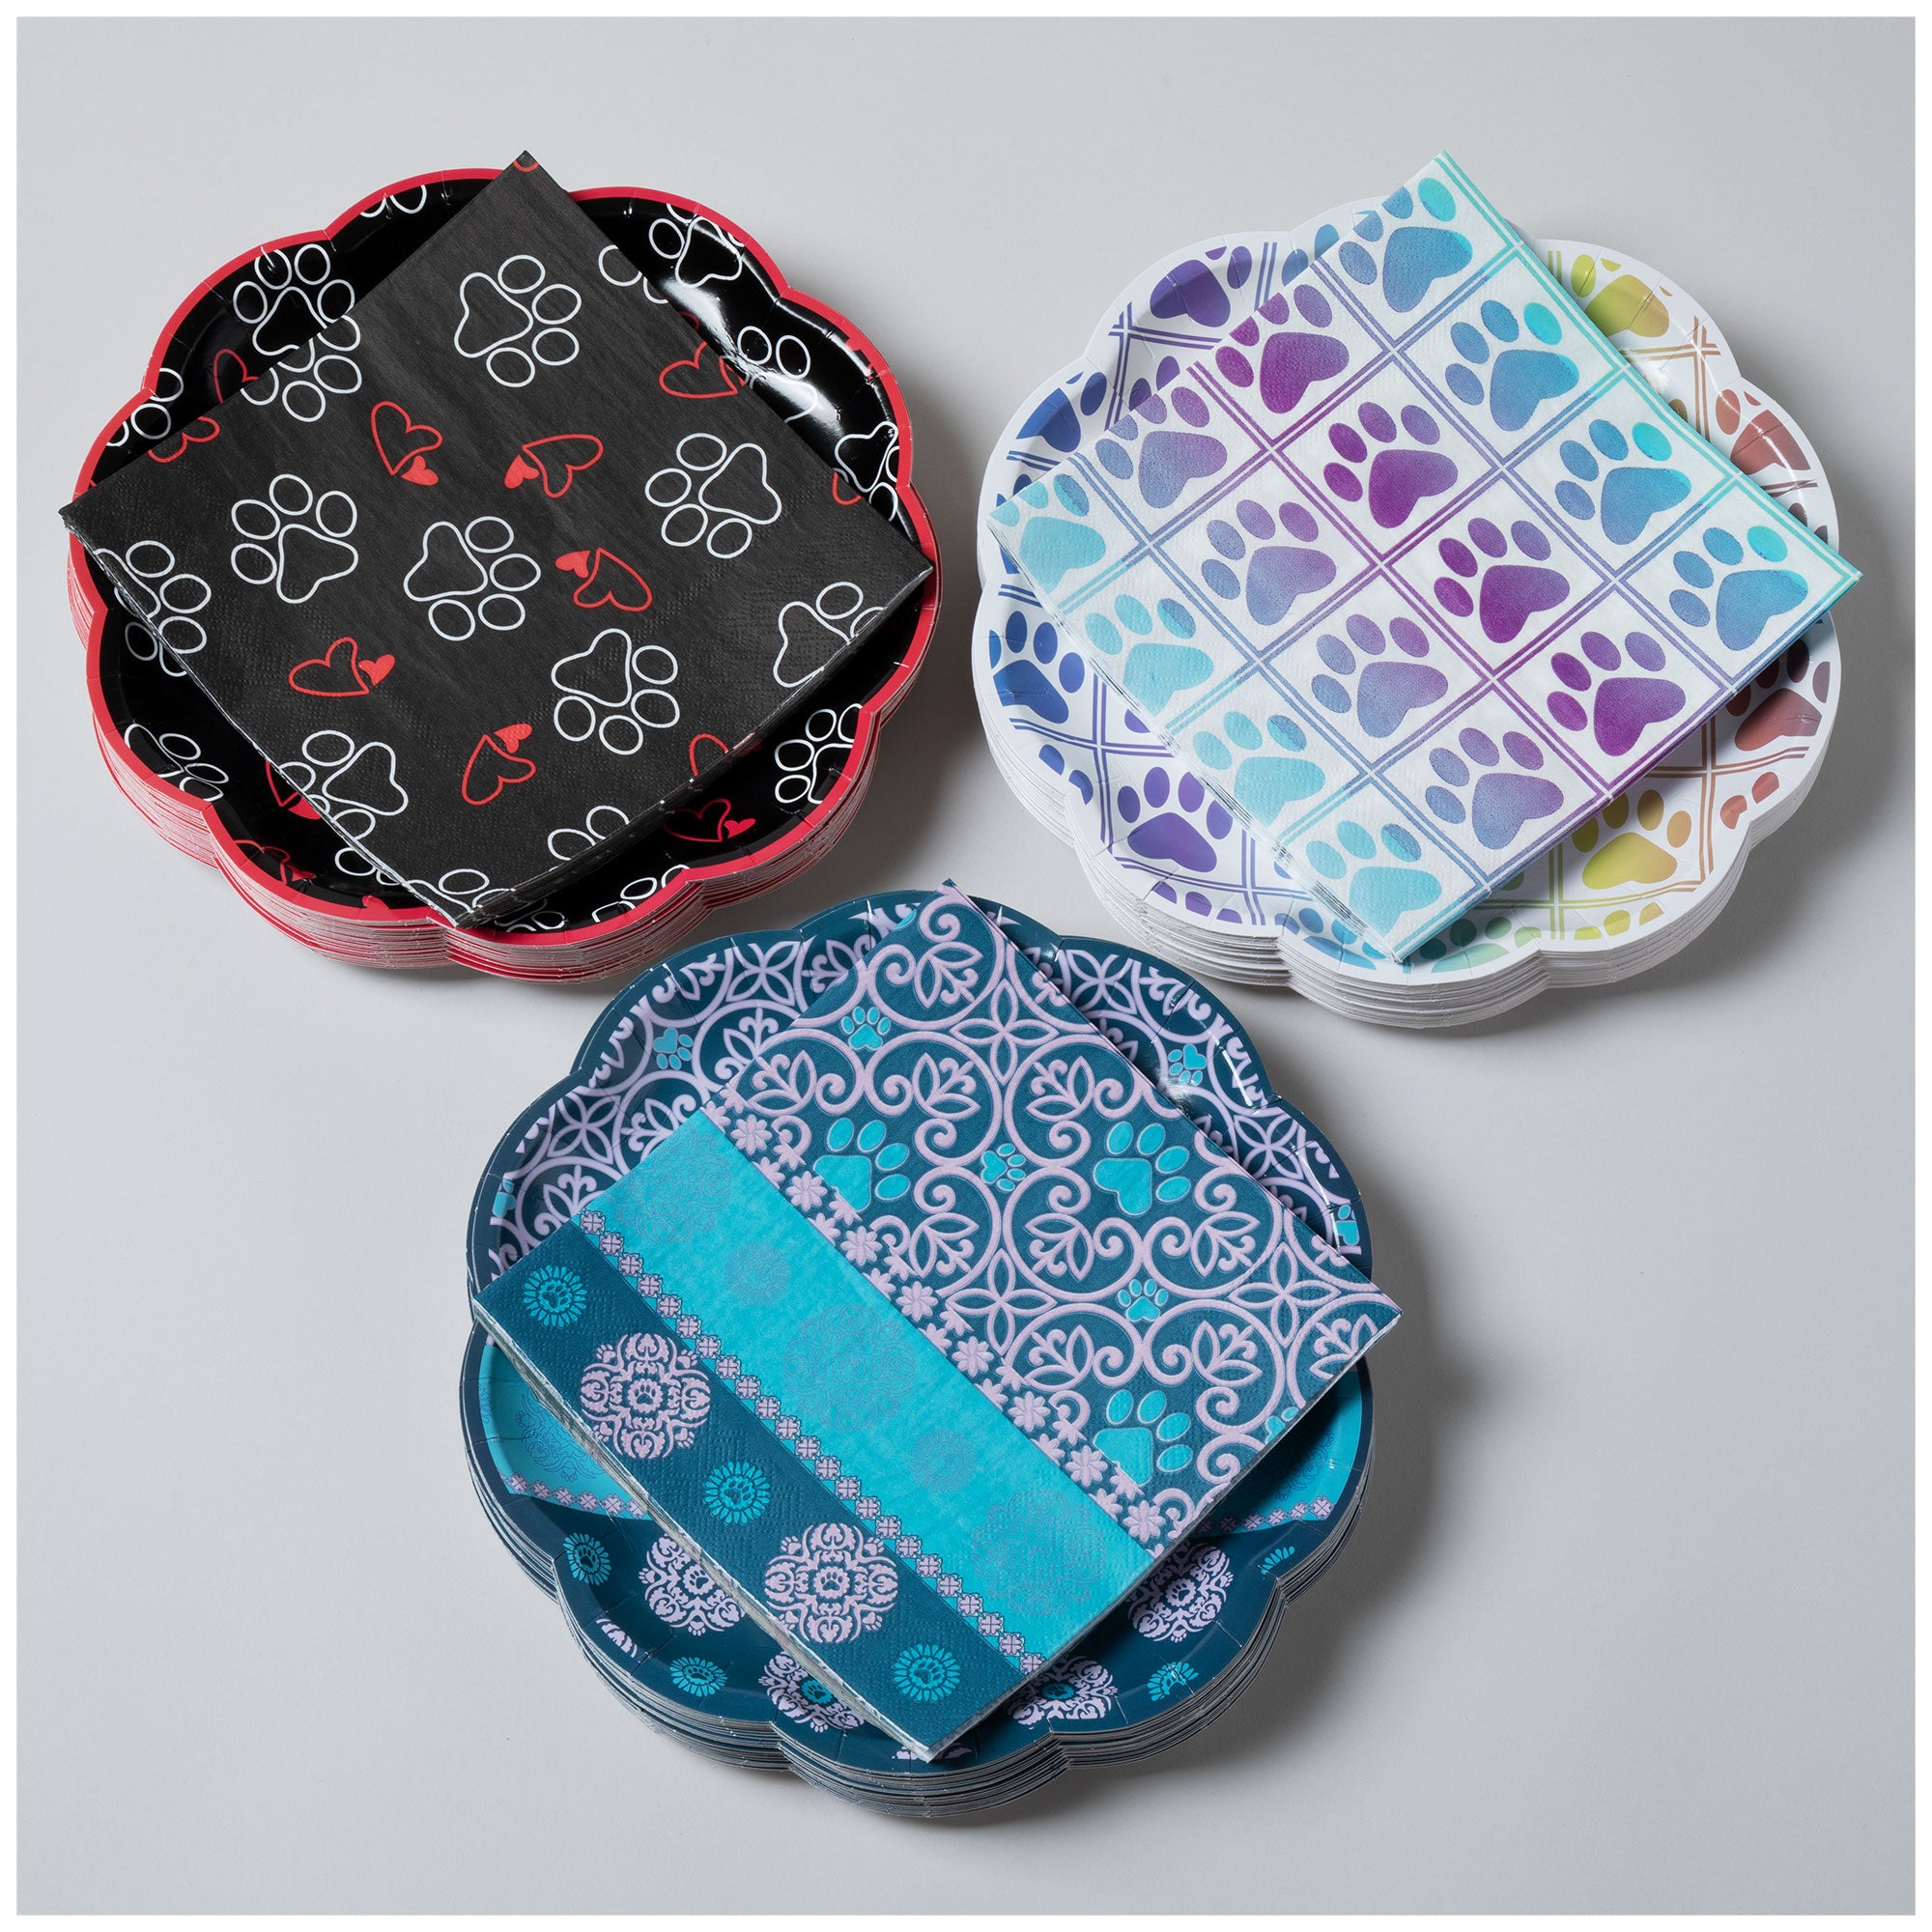 Pawfect Occasion Paper Plates & Napkins - Perfectly Patterned Paws - Napkins Only